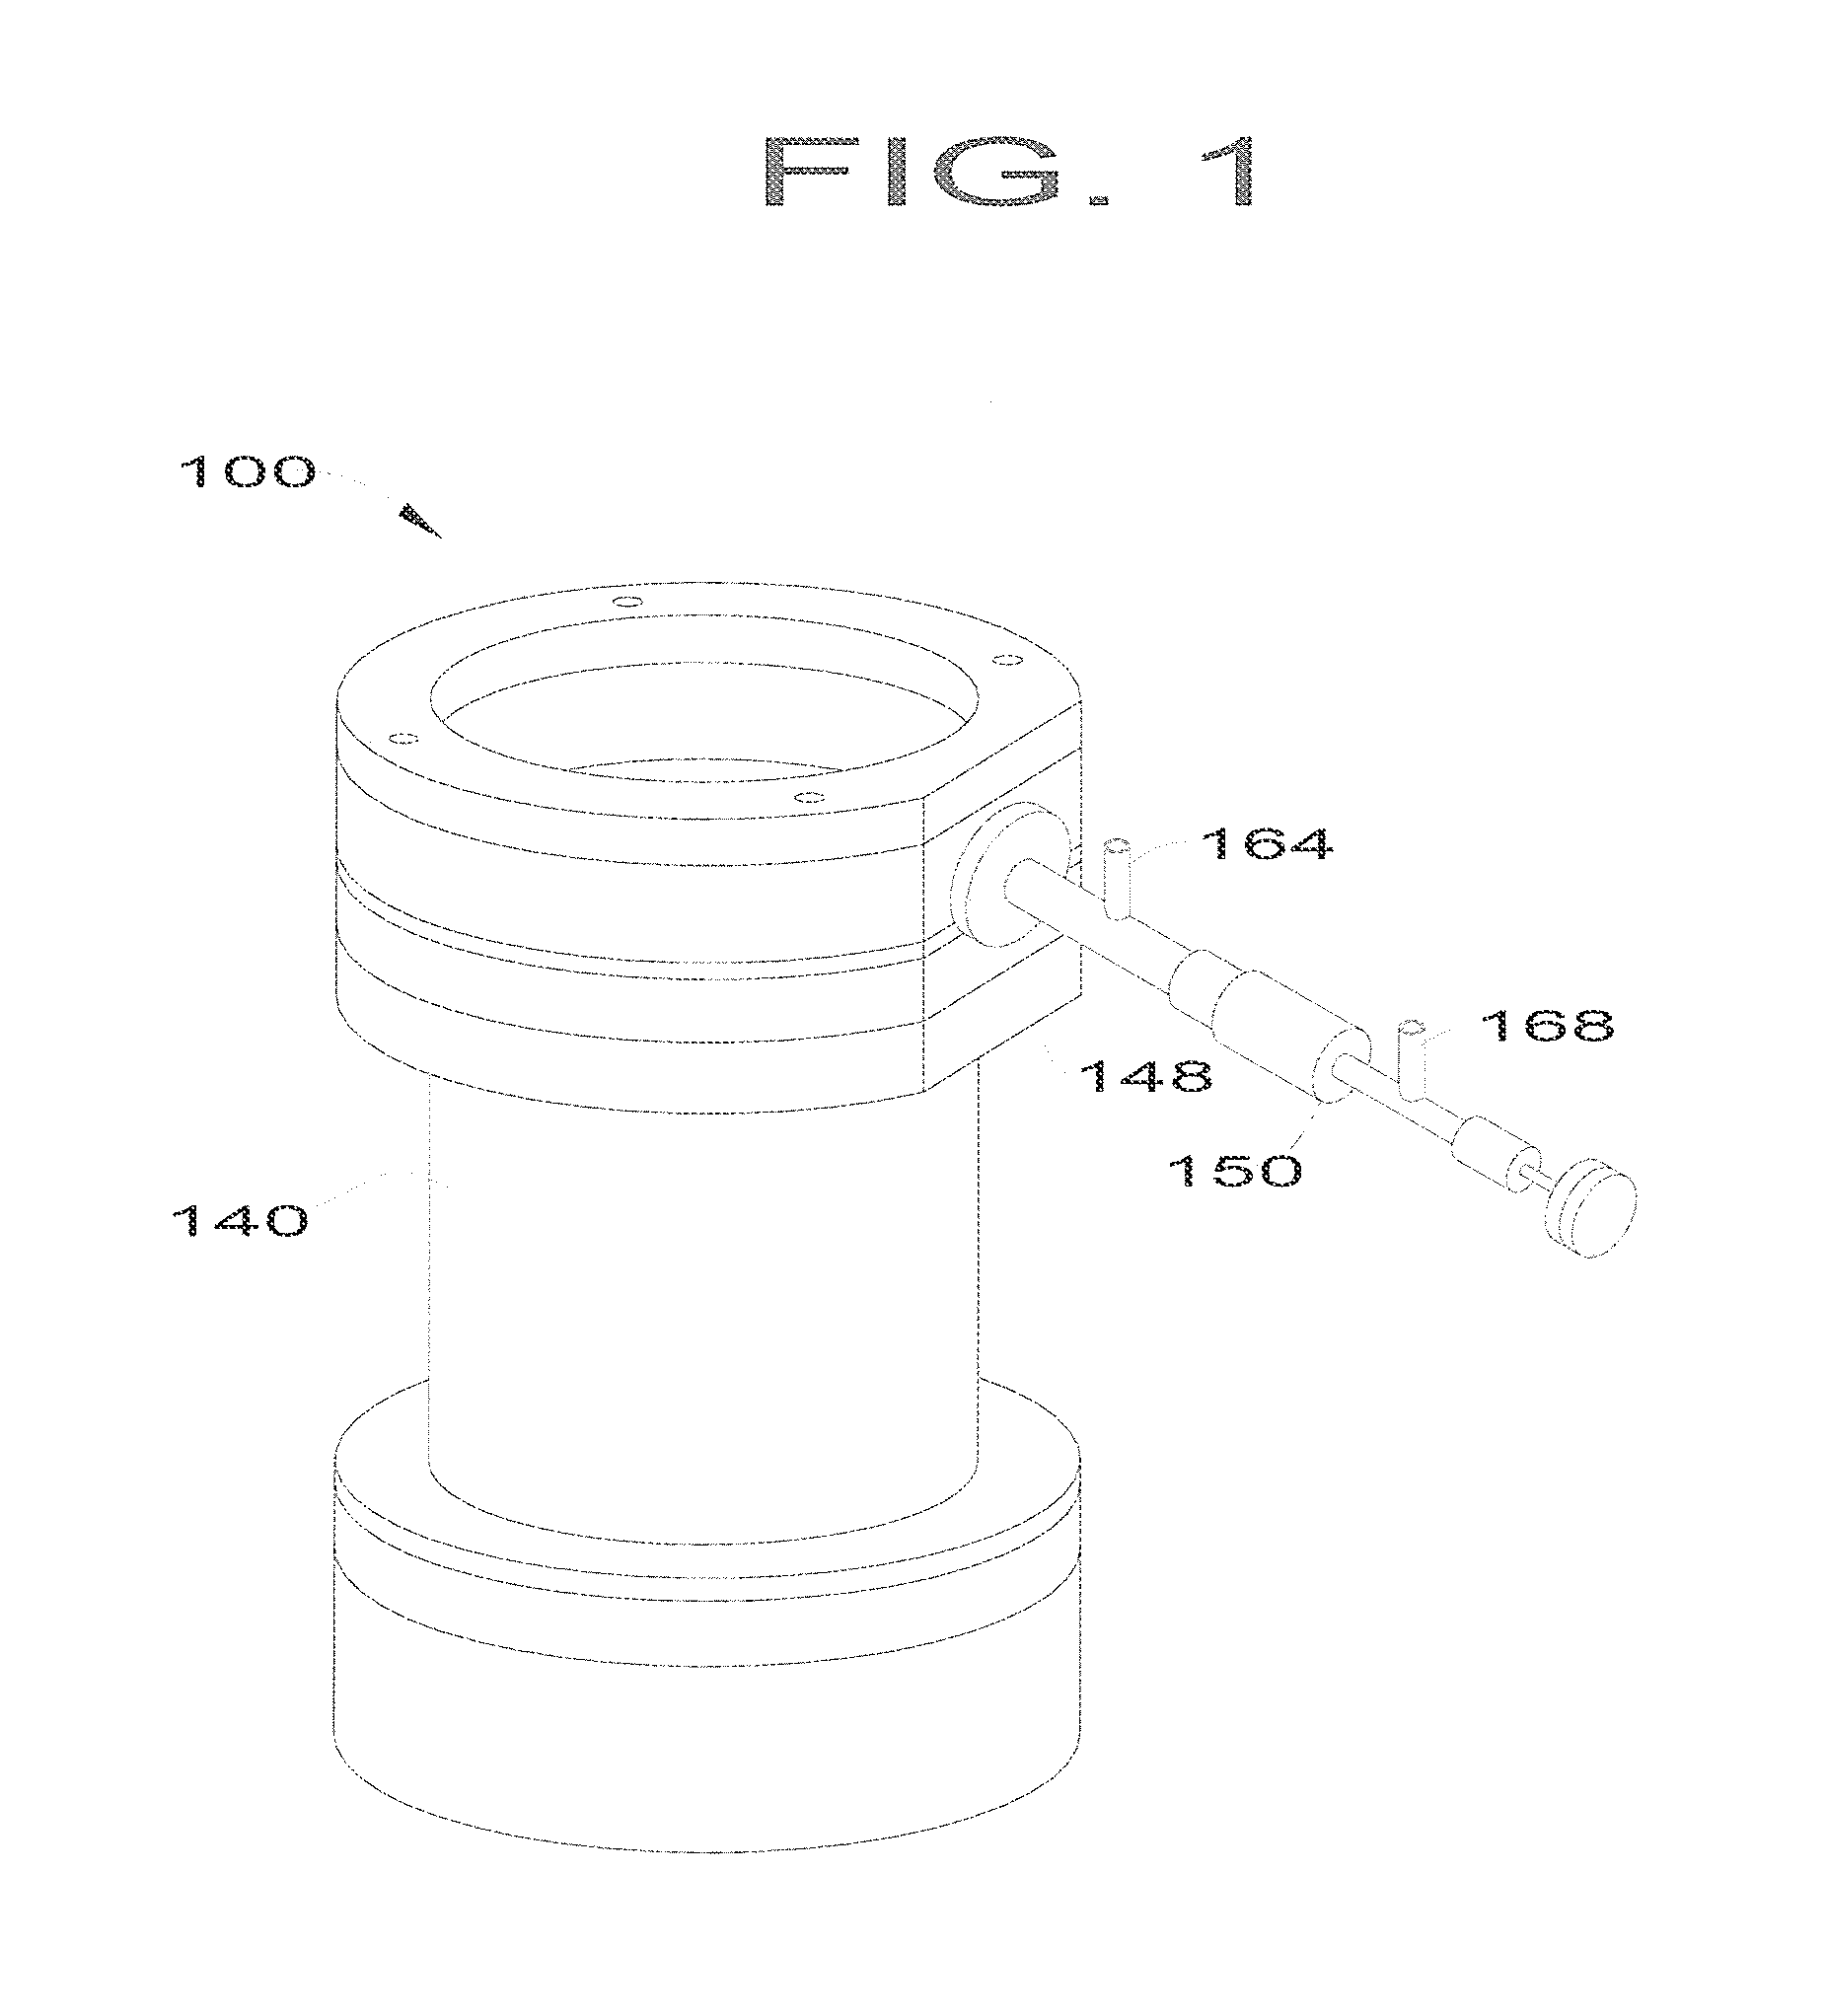 Apparatus and process for contacting and separating liquids